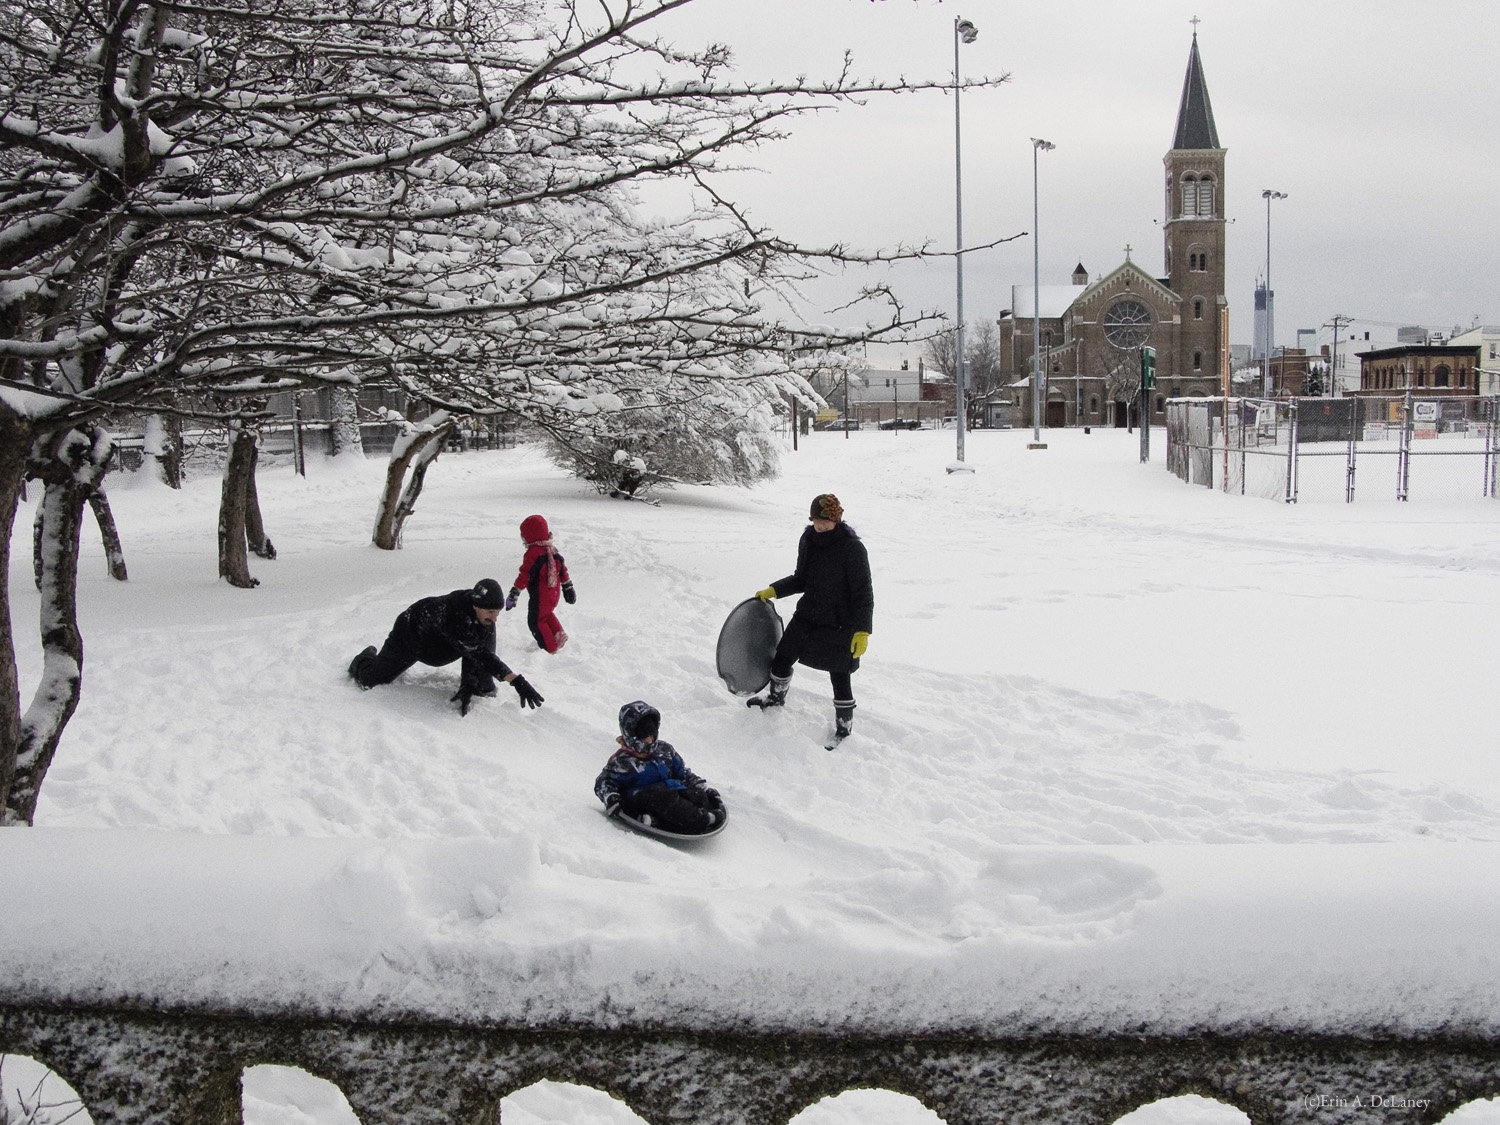 Sledding in Pershing Field Park, Jersey City, 2013